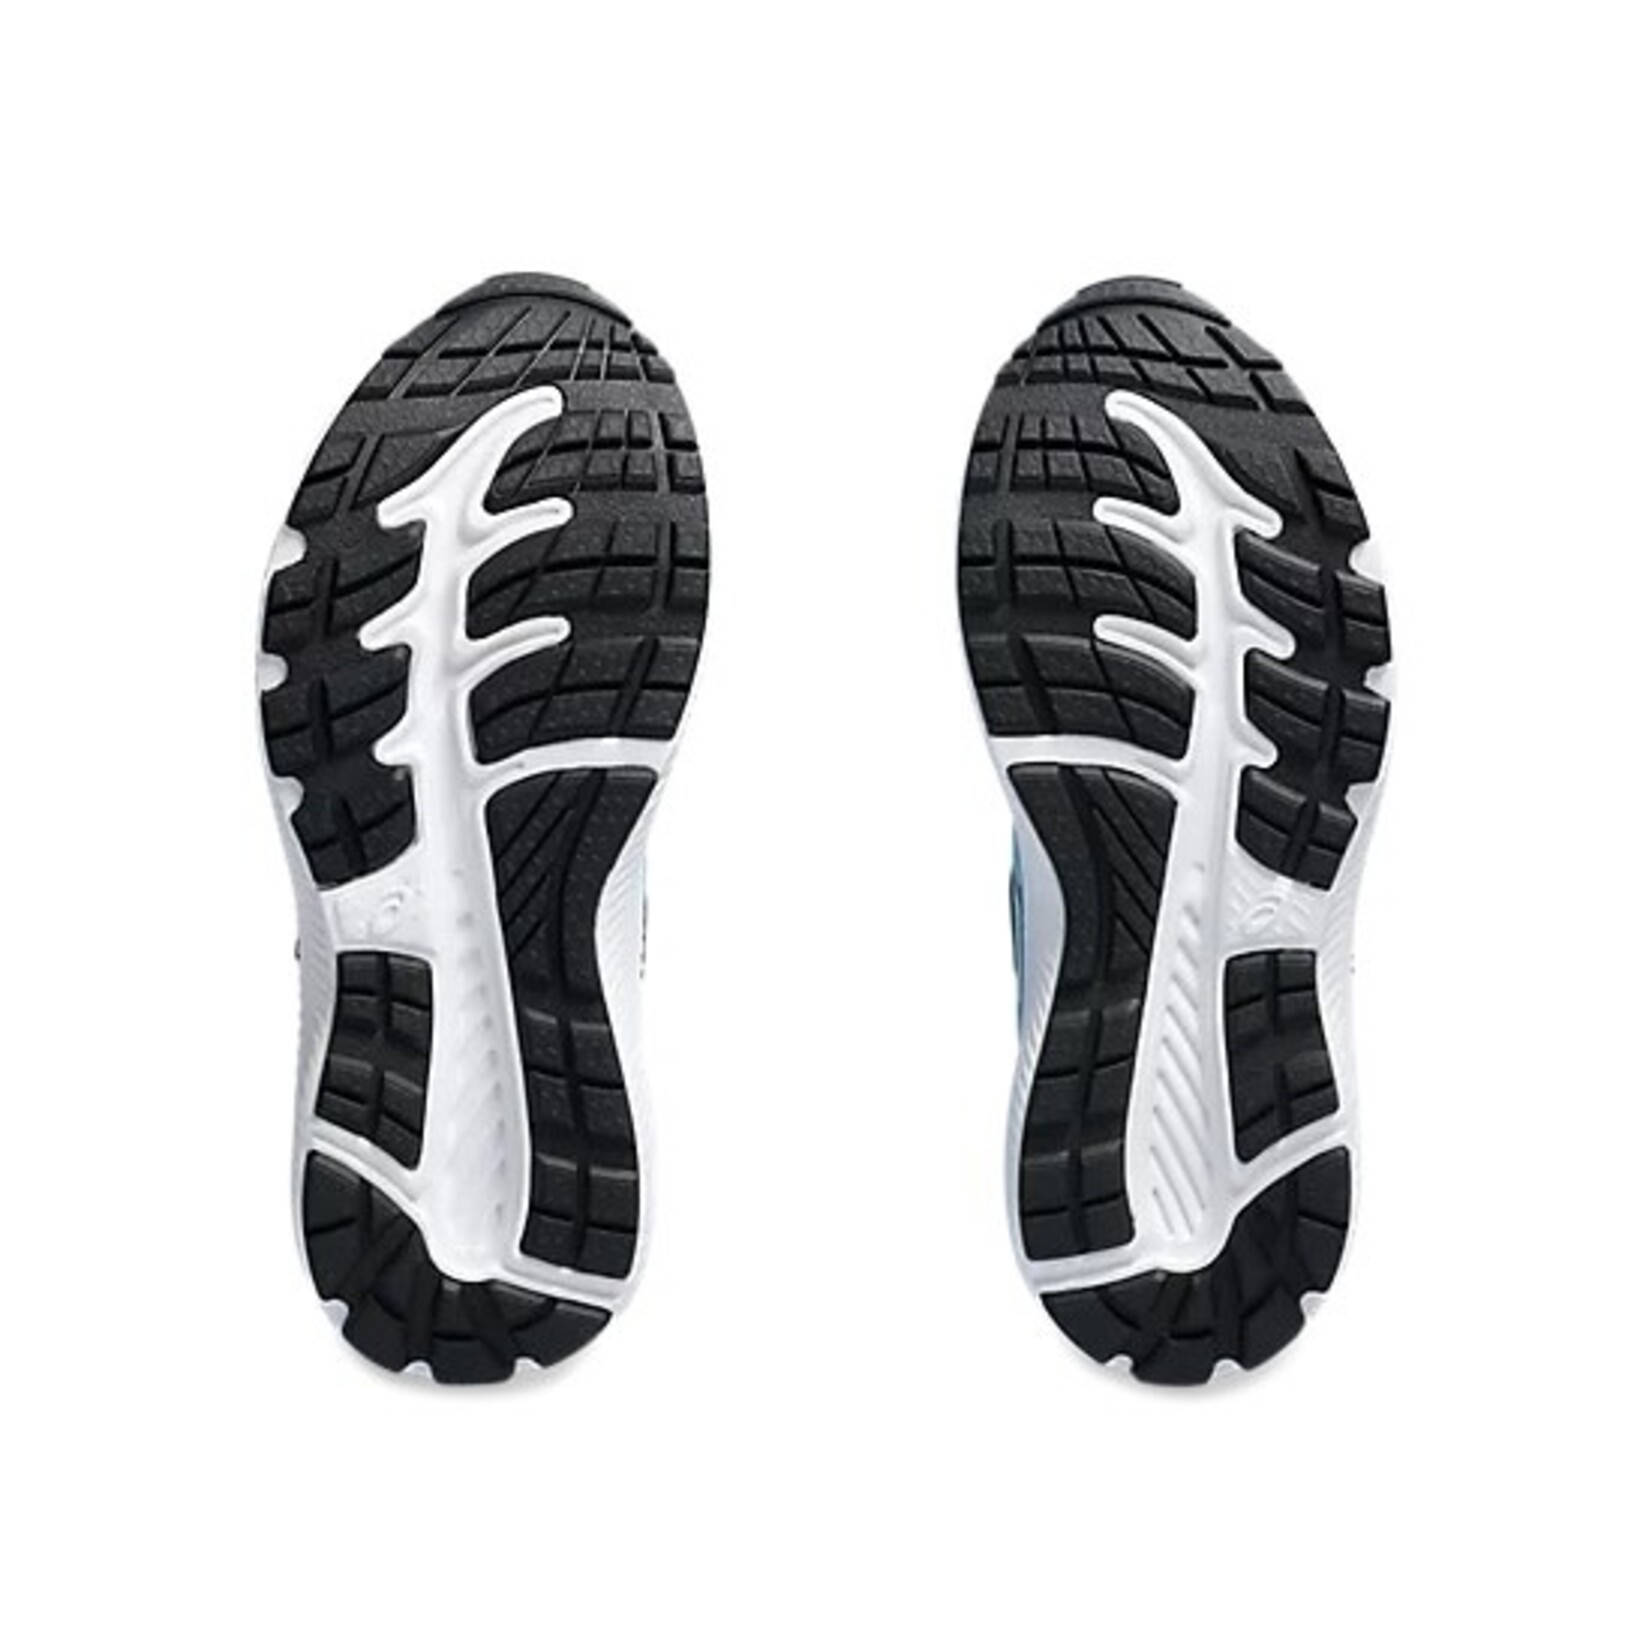 Asics ASICS - Running Shoes 'Contend 8PS - Waterscape/Black'